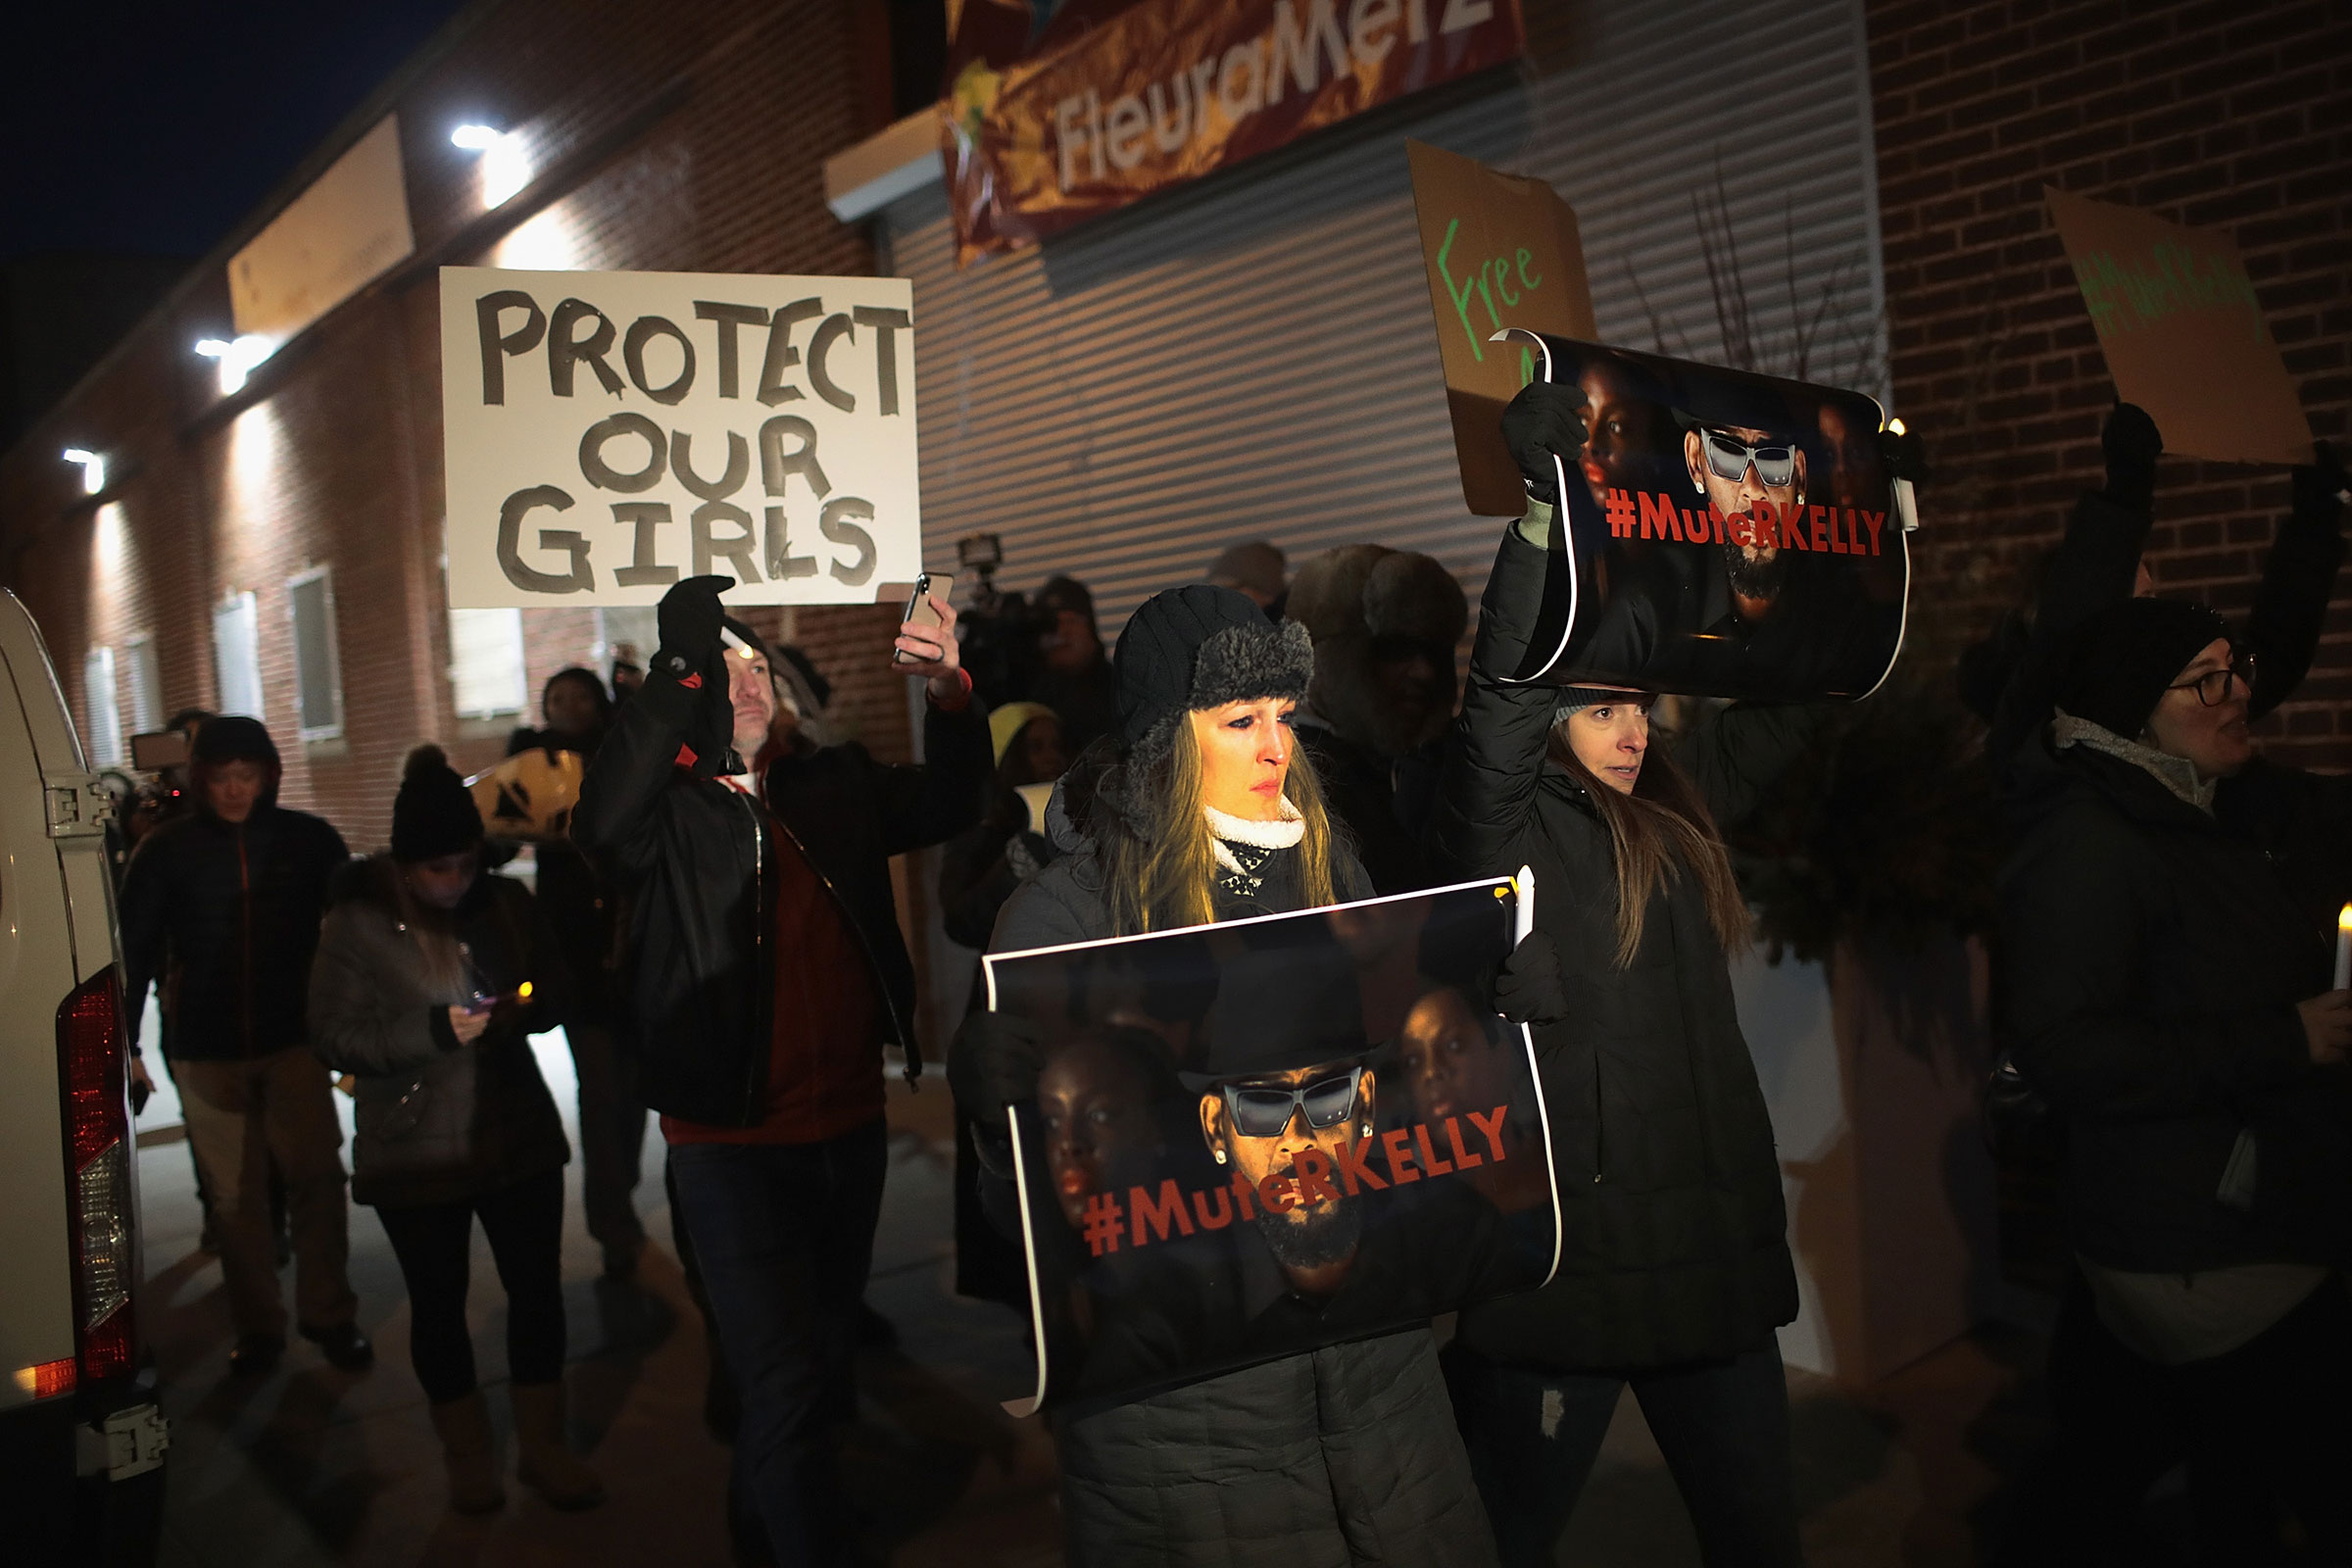 Demonstrators gather near the studio of singer R. Kelly to call for a boycott of his music after allegations of sexual abuse against young girls in Chicago, on Jan. 09, 2019. (Scott Olson—Getty Images)